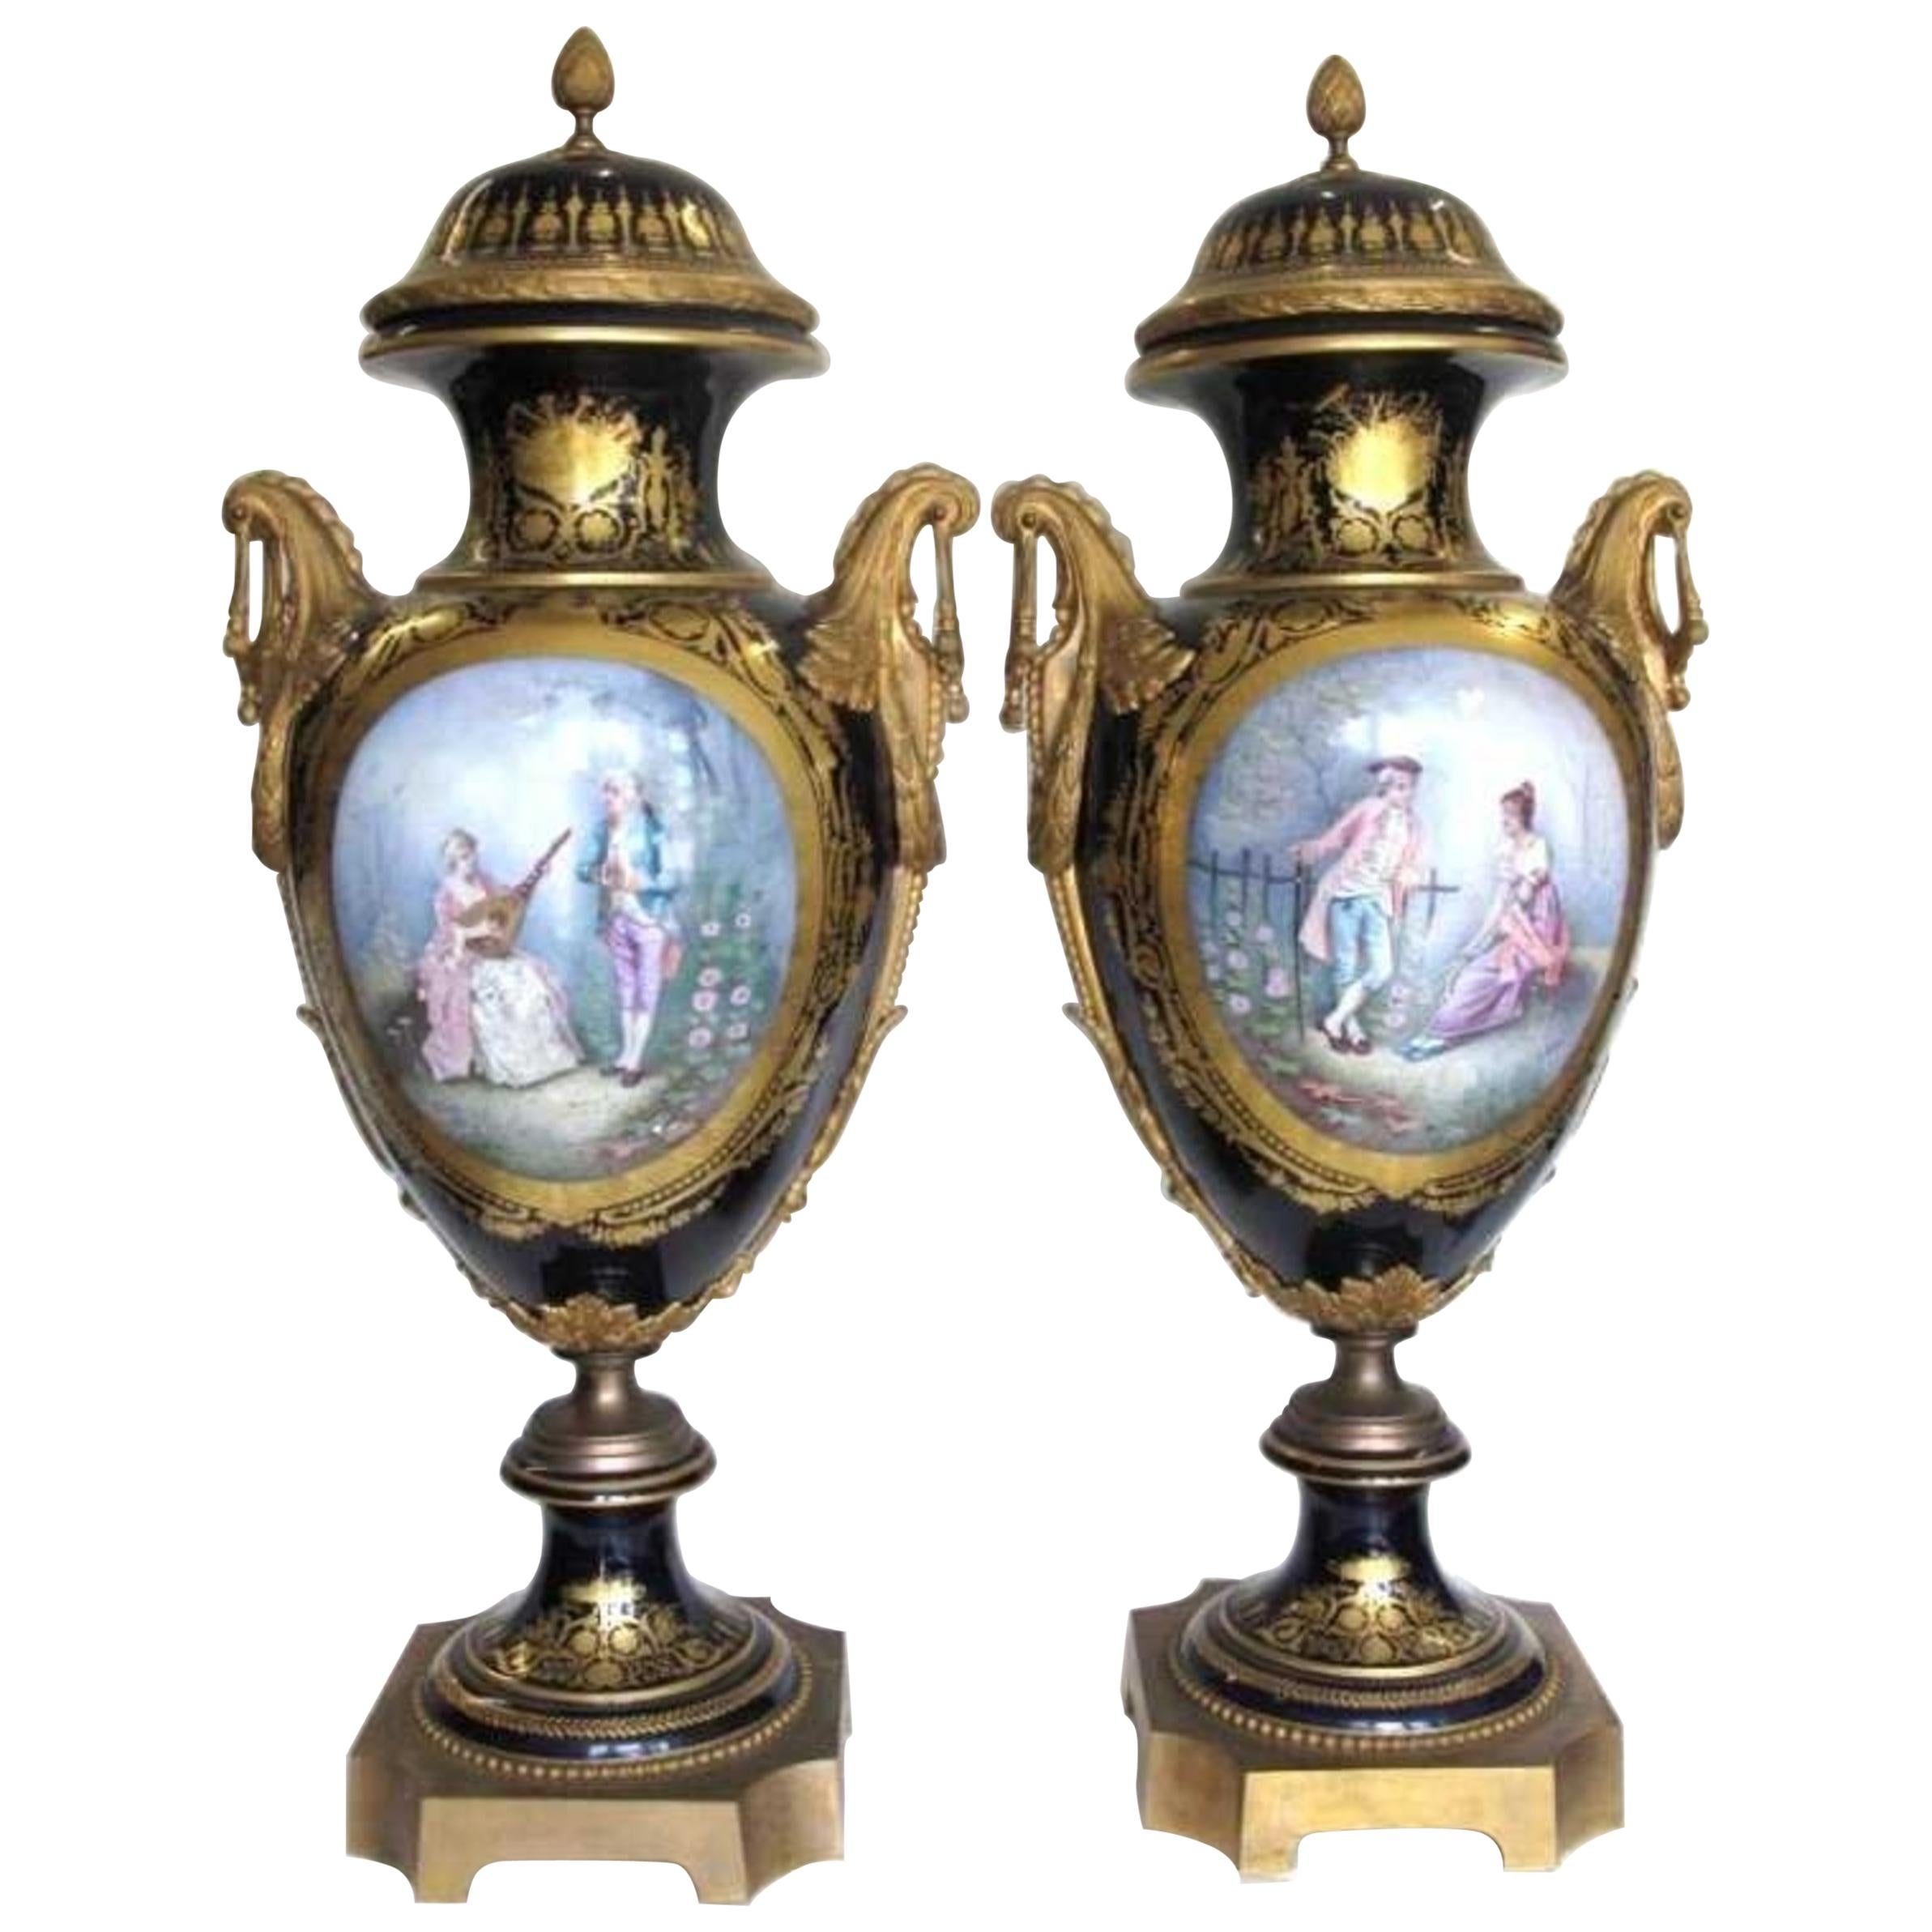 Magnificent Pair of Sevres Gilt Bronze Mounted Vases and Covers, Signed